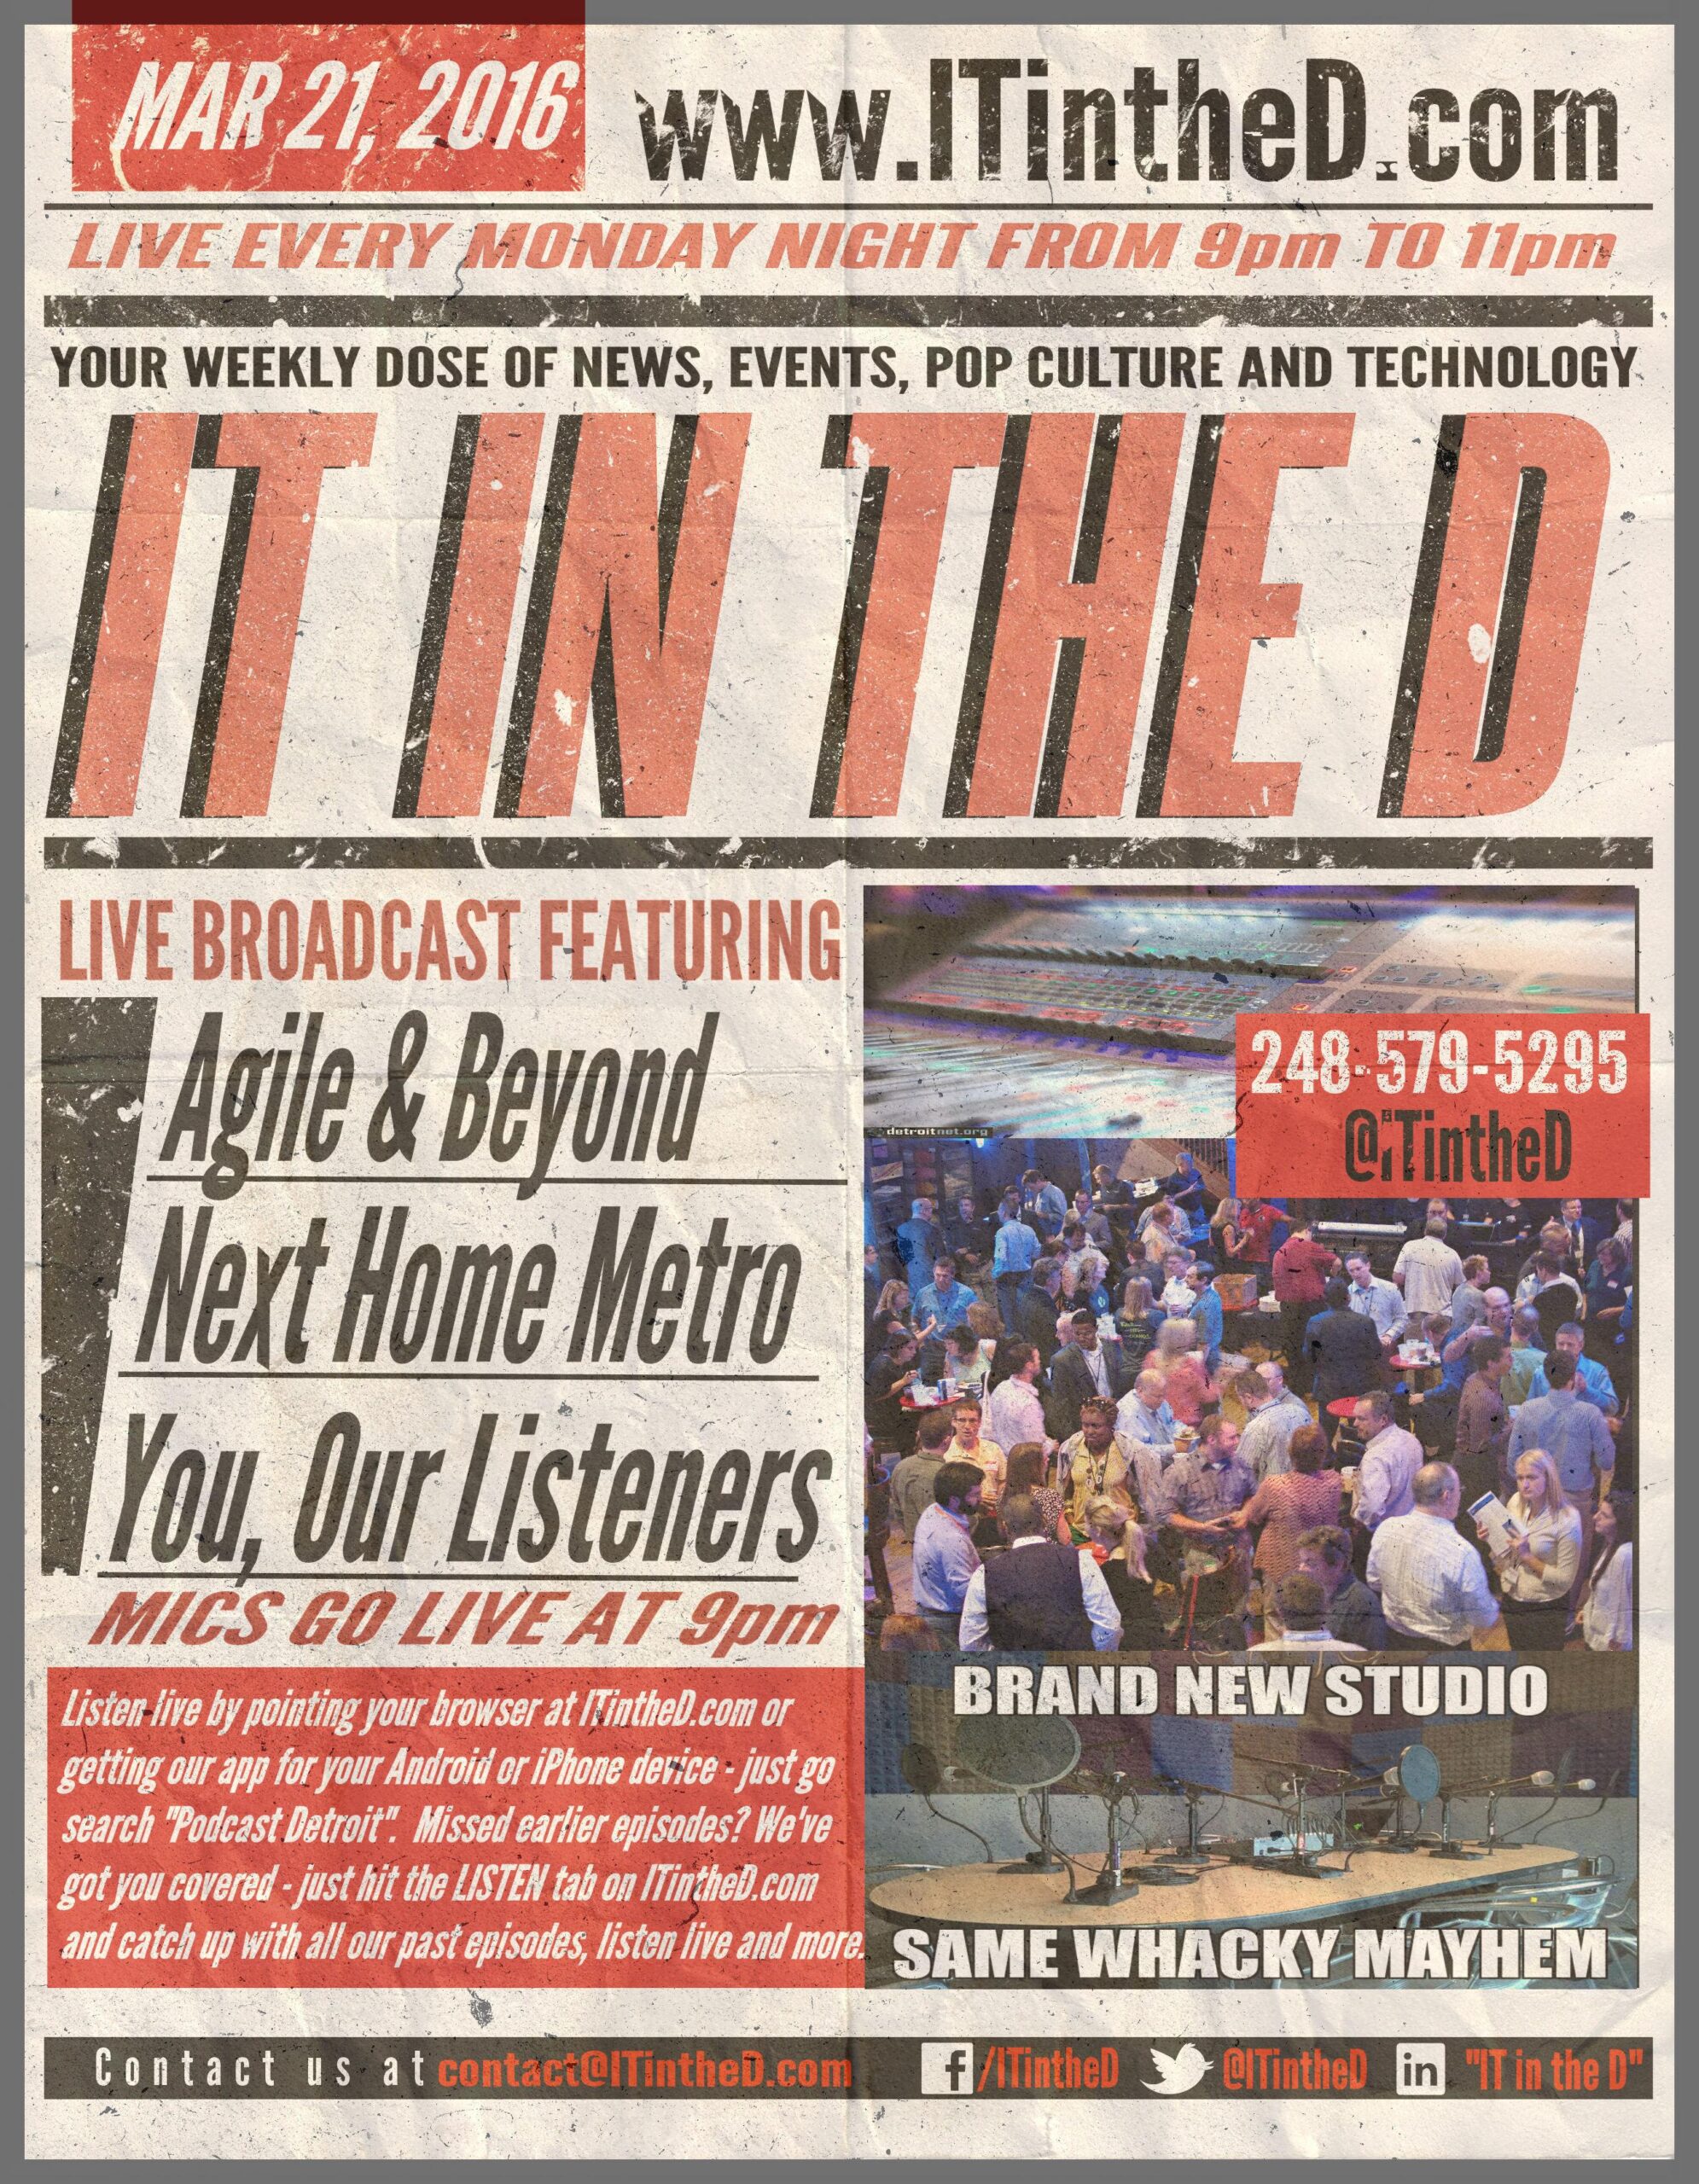 Agile and Beyond, Next Home Metro In Studio Tonight, Updates for 3/21/2014